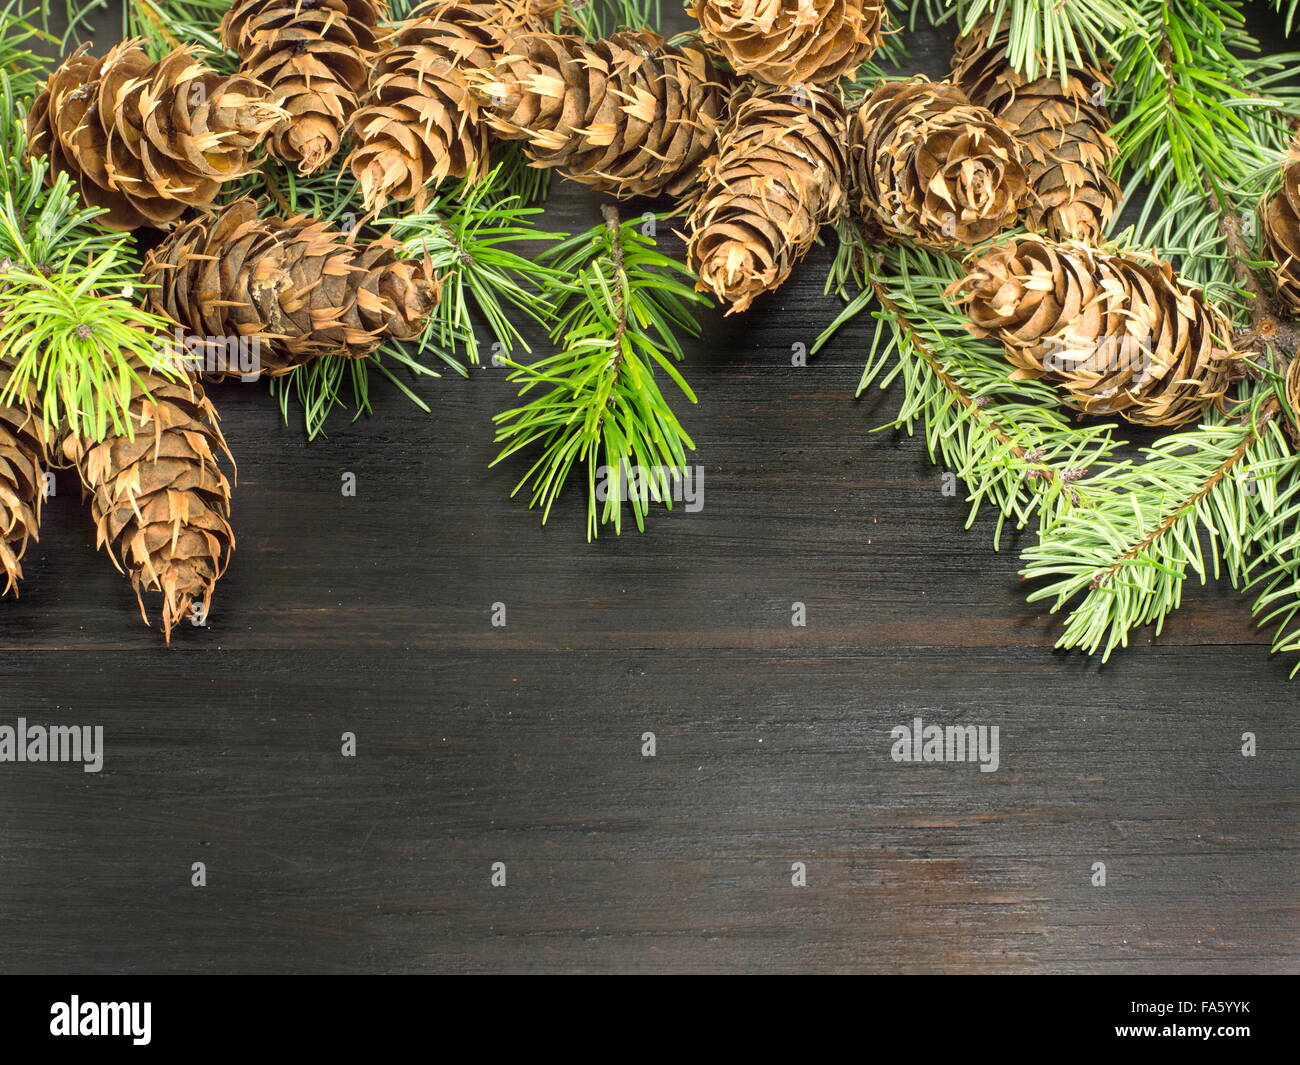 Pine cones Christmas background with fir tree branches Stock Photo